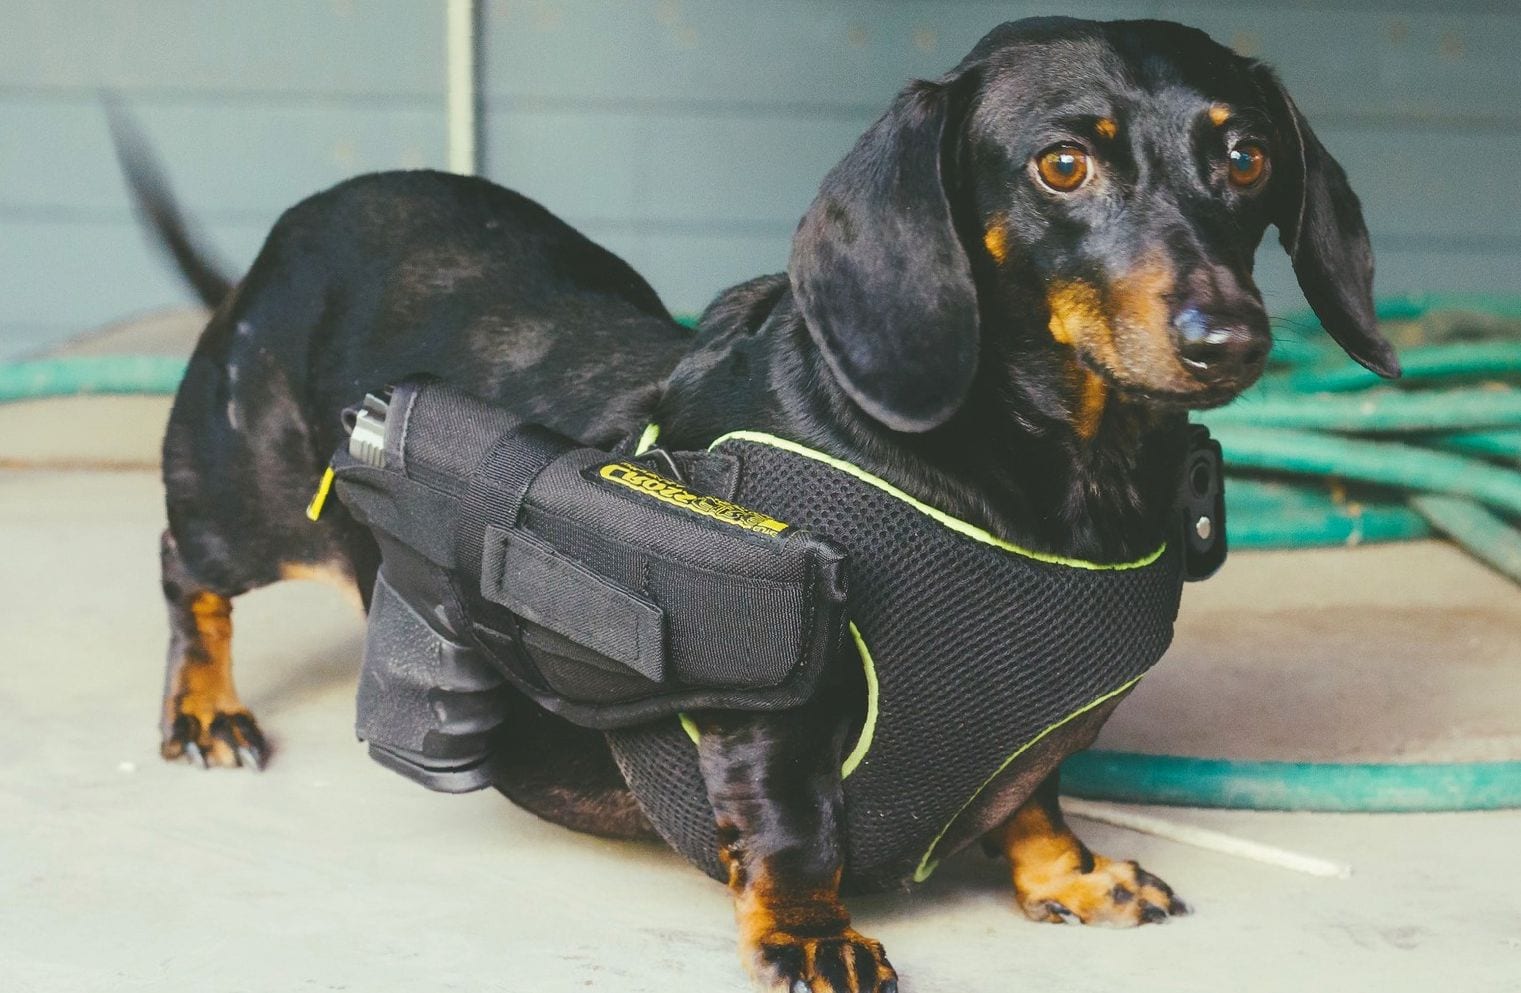 A security guard Dachshund standing on the floor